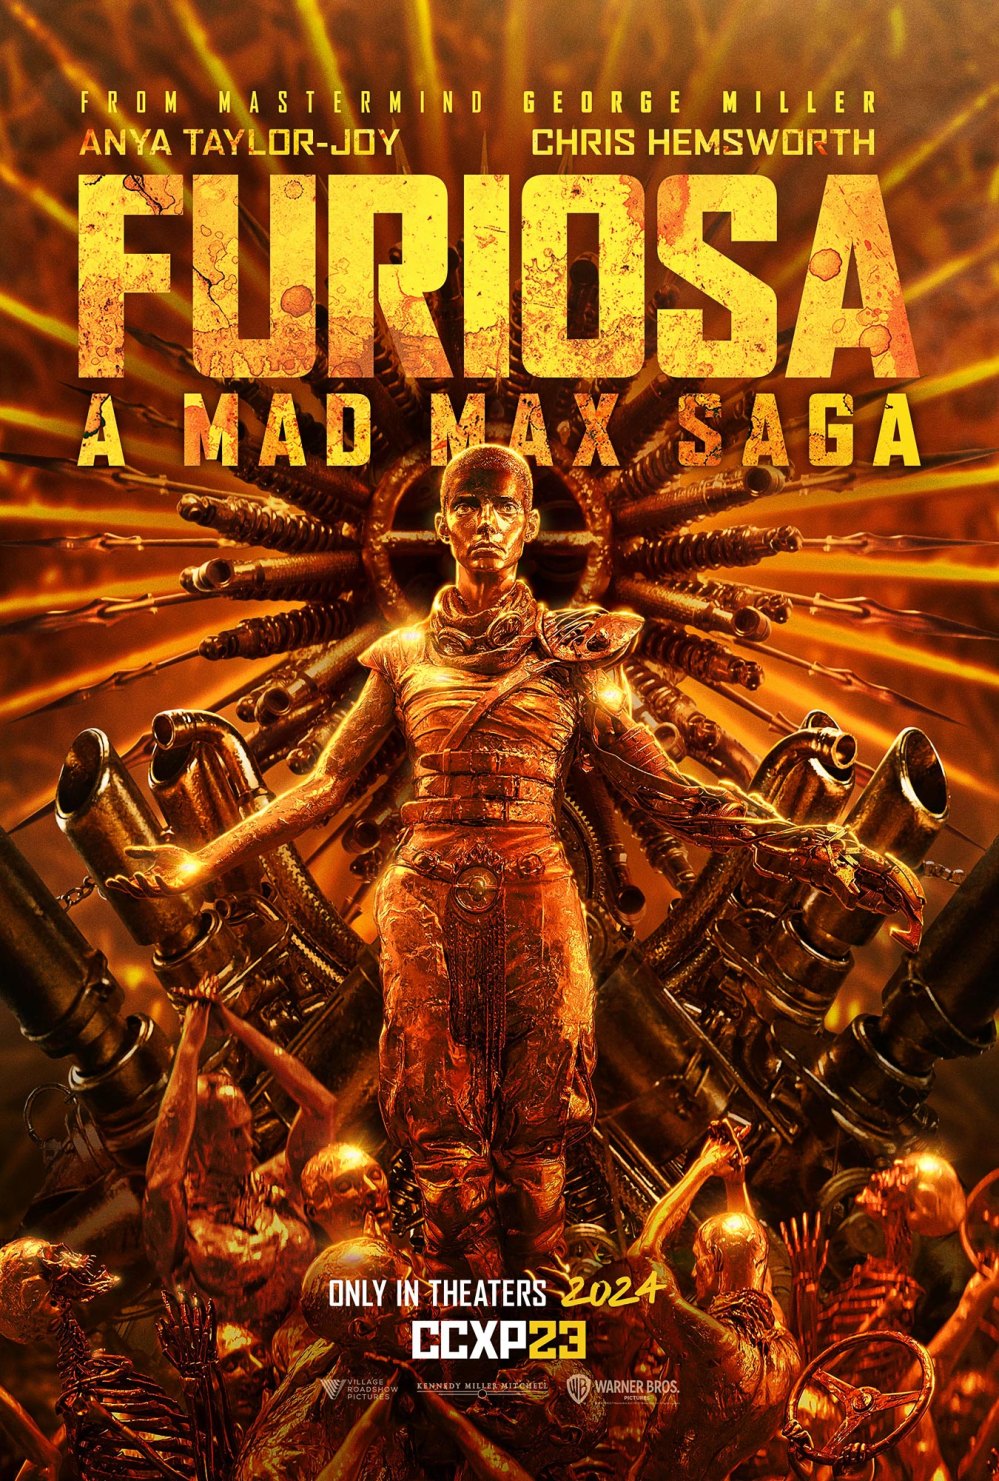 Everything to Know About Furiosa the Mad Max Fury Road Prequel Starring Anya Taylor Joy 884